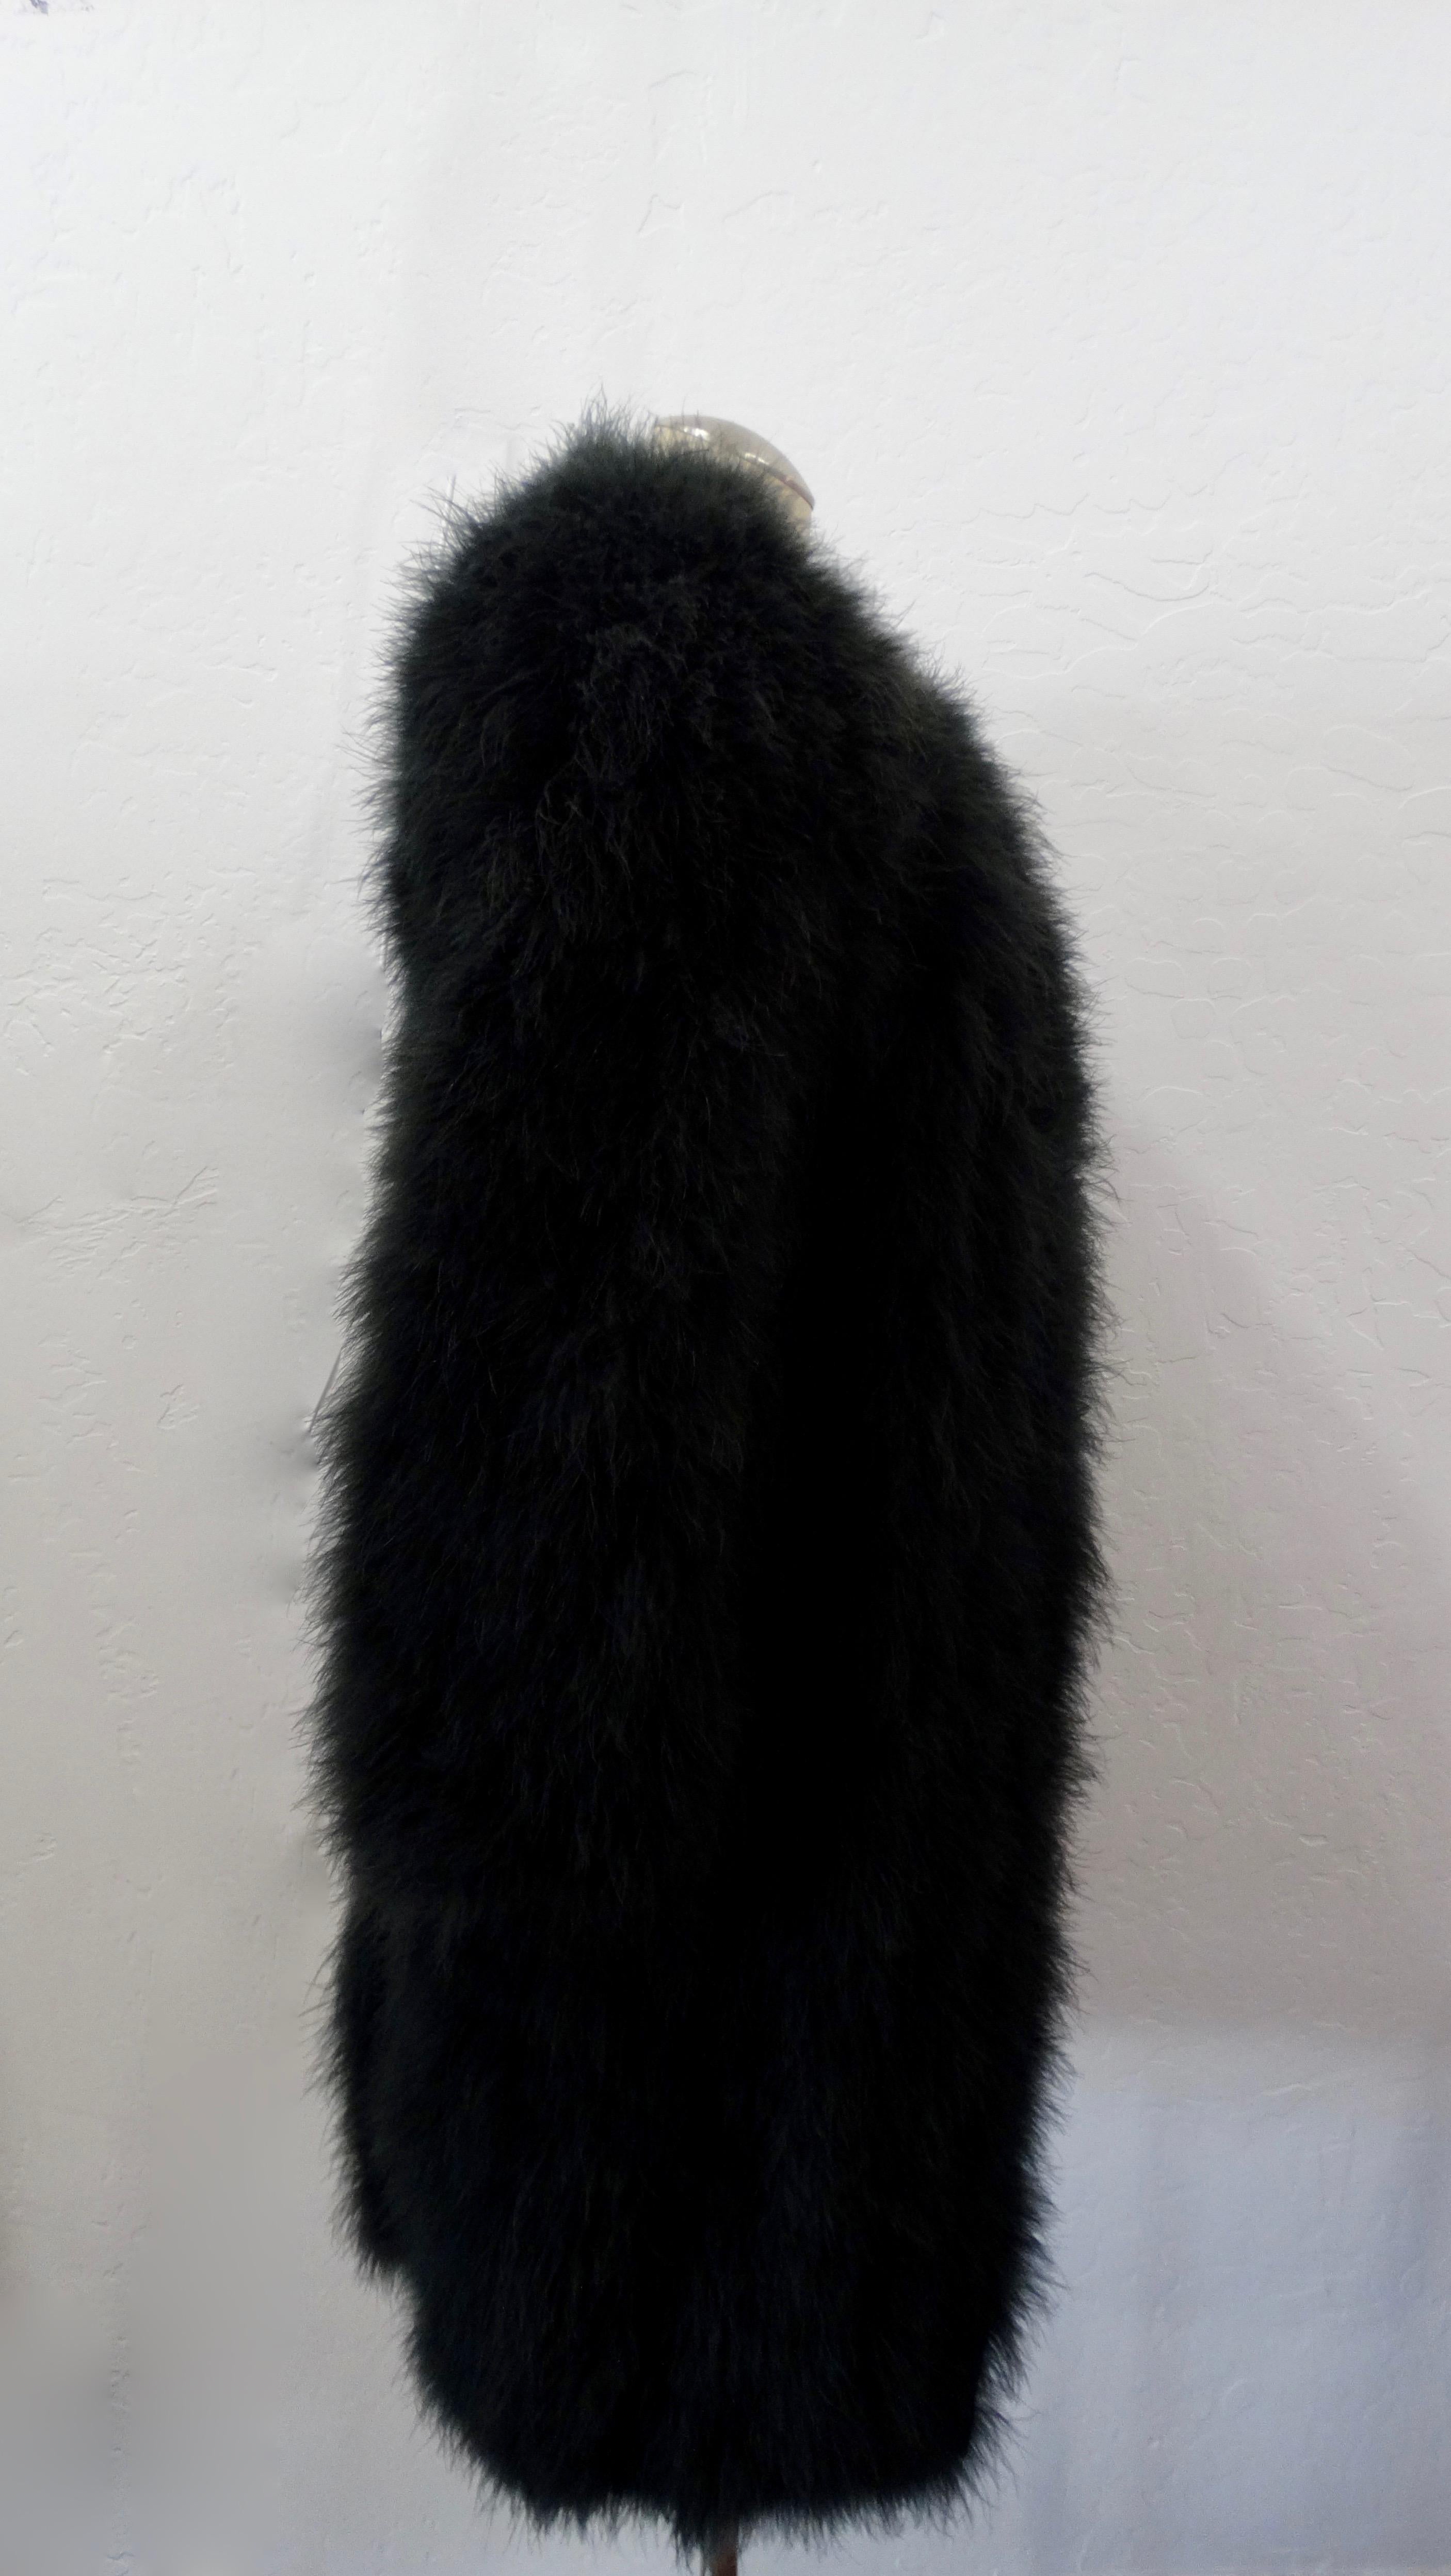 Elevate all of your winter looks with this amazing coat! Circa 1980s, this Sonia Rykiel coat is made of soft black Marabou feathers. Features long sleeves, a single hook and eye closure at the neckline and a fully lined interior (100% Acetate).